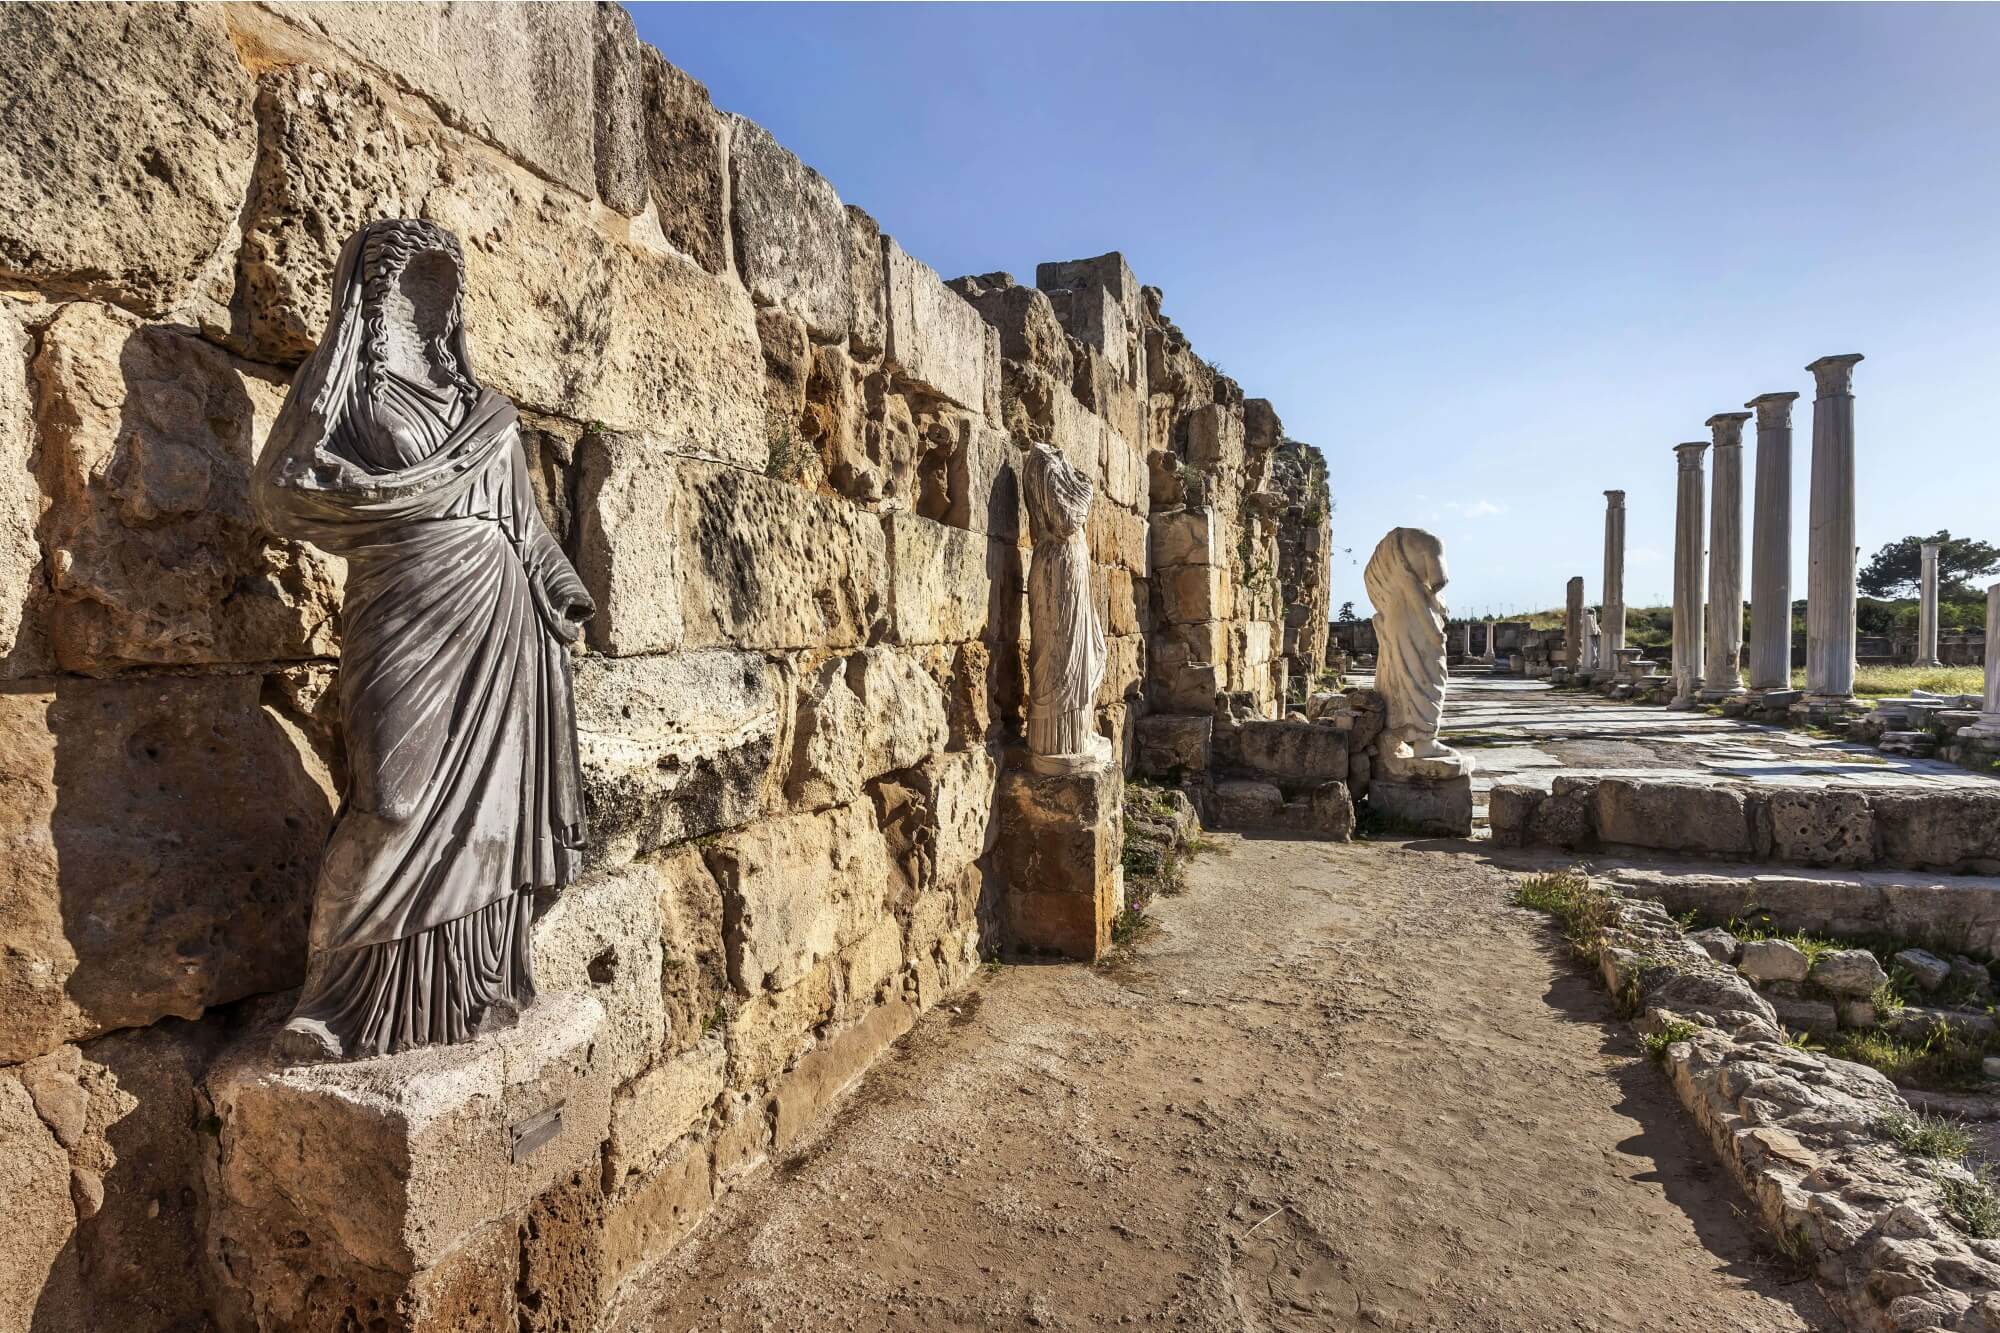 Marble columns and coloured statues, Salamis Ruins